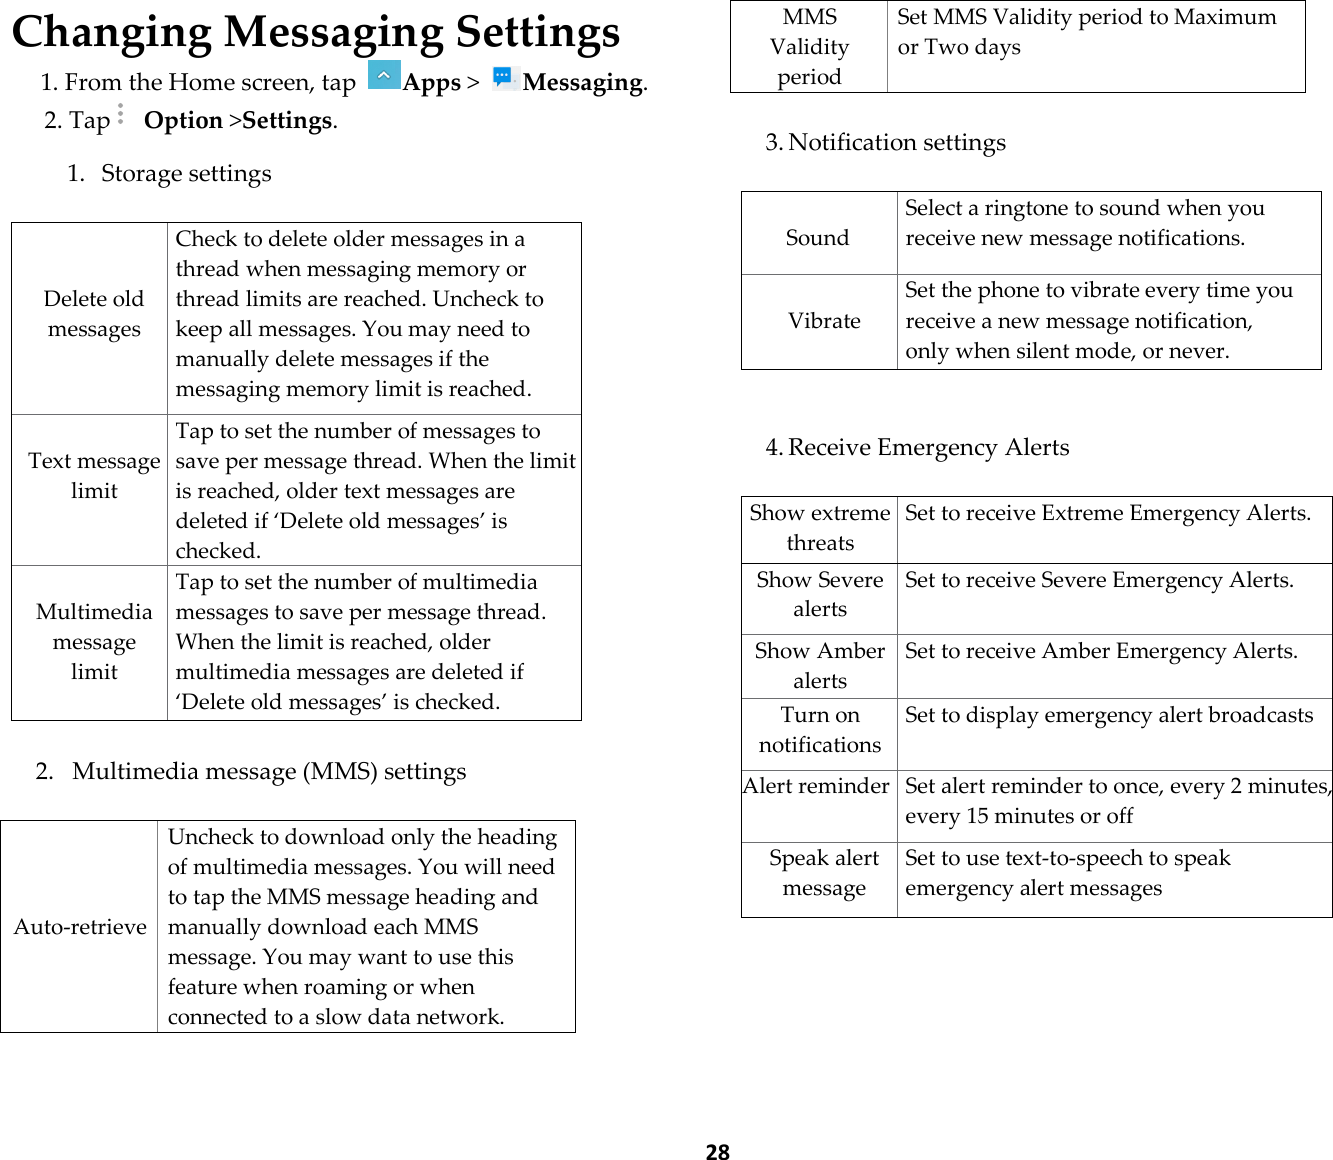  28 Changing Messaging Settings 1. From the Home screen, tap Apps &gt; Messaging. 2. Tap  Option &gt;Settings.  1.   Storage settings      Delete old messages Check to delete older messages in a thread when messaging memory or thread limits are reached. Uncheck to keep all messages. You may need to manually delete messages if the messaging memory limit is reached.  Text message limit Tap to set the number of messages to save per message thread. When the limit is reached, older text messages are deleted if ‘Delete old messages’ is checked.  Multimedia message limit Tap to set the number of multimedia messages to save per message thread. When the limit is reached, older multimedia messages are deleted if ‘Delete old messages’ is checked.  2. Multimedia message (MMS) settings     Auto-retrieve Uncheck to download only the heading of multimedia messages. You will need to tap the MMS message heading and manually download each MMS message. You may want to use this feature when roaming or when connected to a slow data network. MMS Validity period Set MMS Validity period to Maximum or Two days  3. Notification settings   Sound Select a ringtone to sound when you receive new message notifications.  Vibrate Set the phone to vibrate every time you receive a new message notification, only when silent mode, or never.  4. Receive Emergency Alerts  Show extreme threats Set to receive Extreme Emergency Alerts. Show Severe alerts Set to receive Severe Emergency Alerts. Show Amber alerts Set to receive Amber Emergency Alerts. Turn on notifications Set to display emergency alert broadcasts Alert reminder Set alert reminder to once, every 2 minutes, every 15 minutes or off Speak alert message Set to use text-to-speech to speak emergency alert messages  